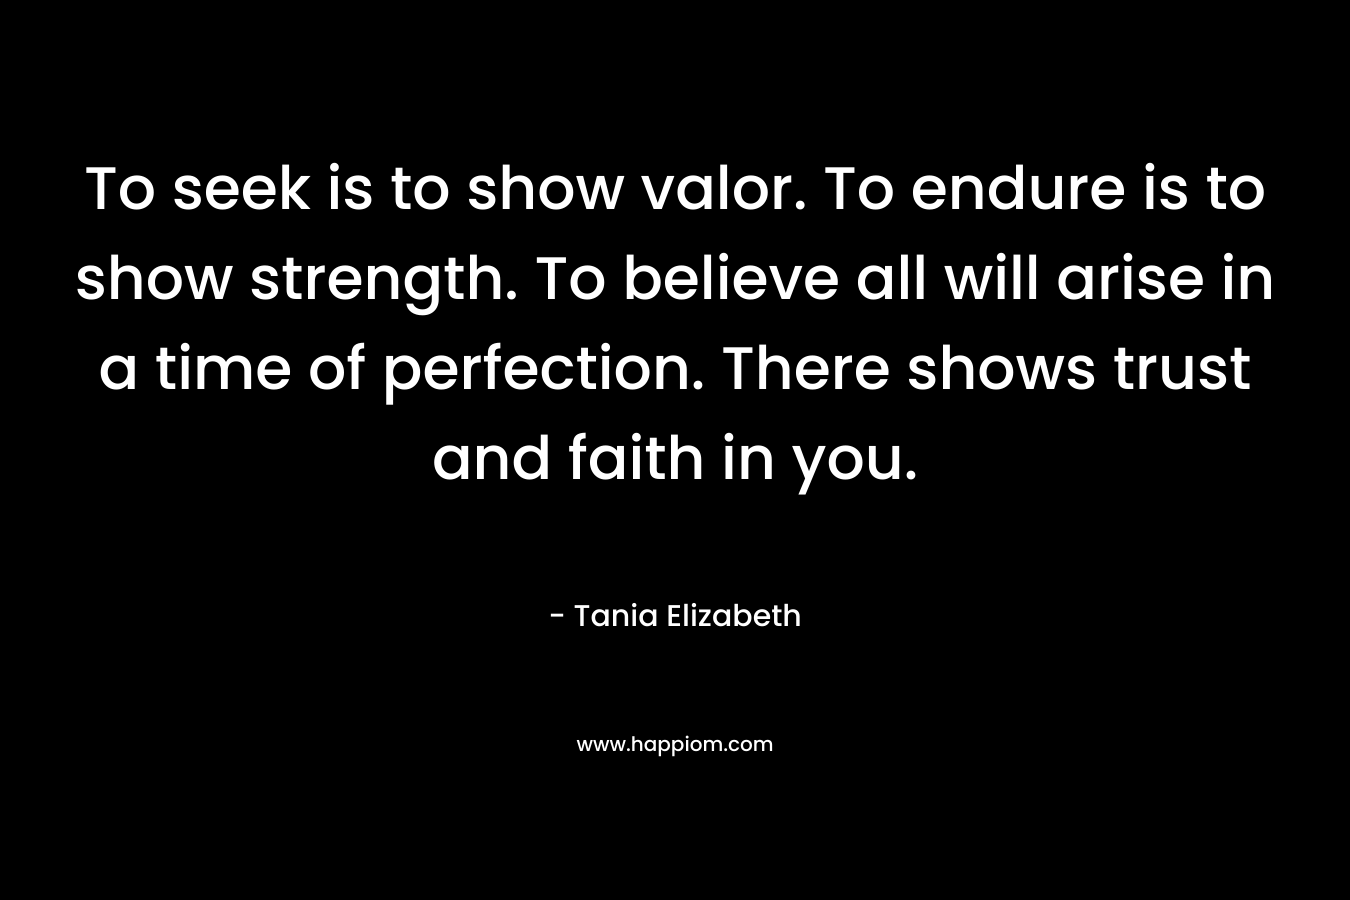 To seek is to show valor. To endure is to show strength. To believe all will arise in a time of perfection. There shows trust and faith in you.